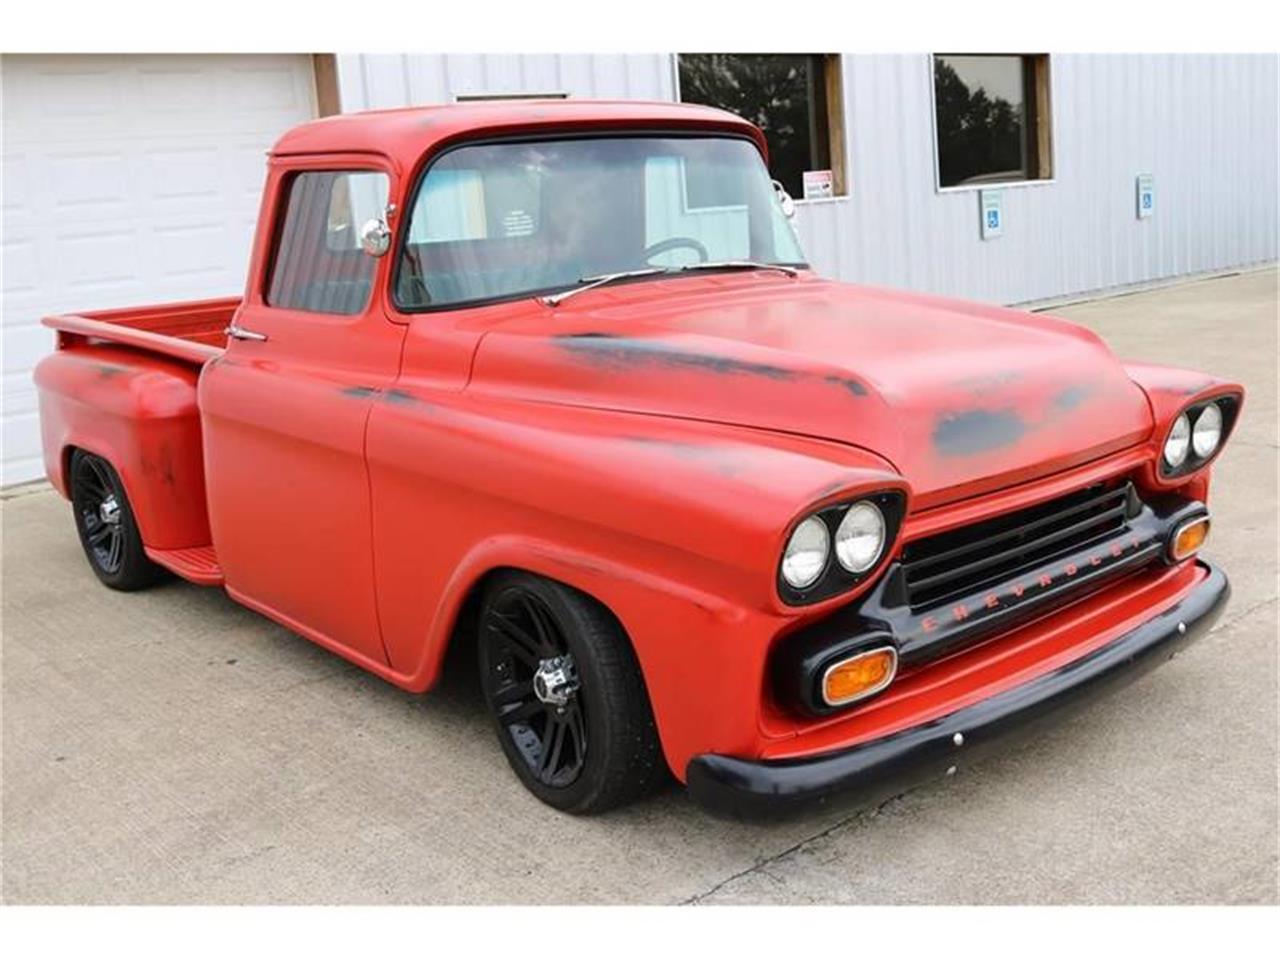 For Sale: 1958 Chevrolet Apache in Conroe, Texas.